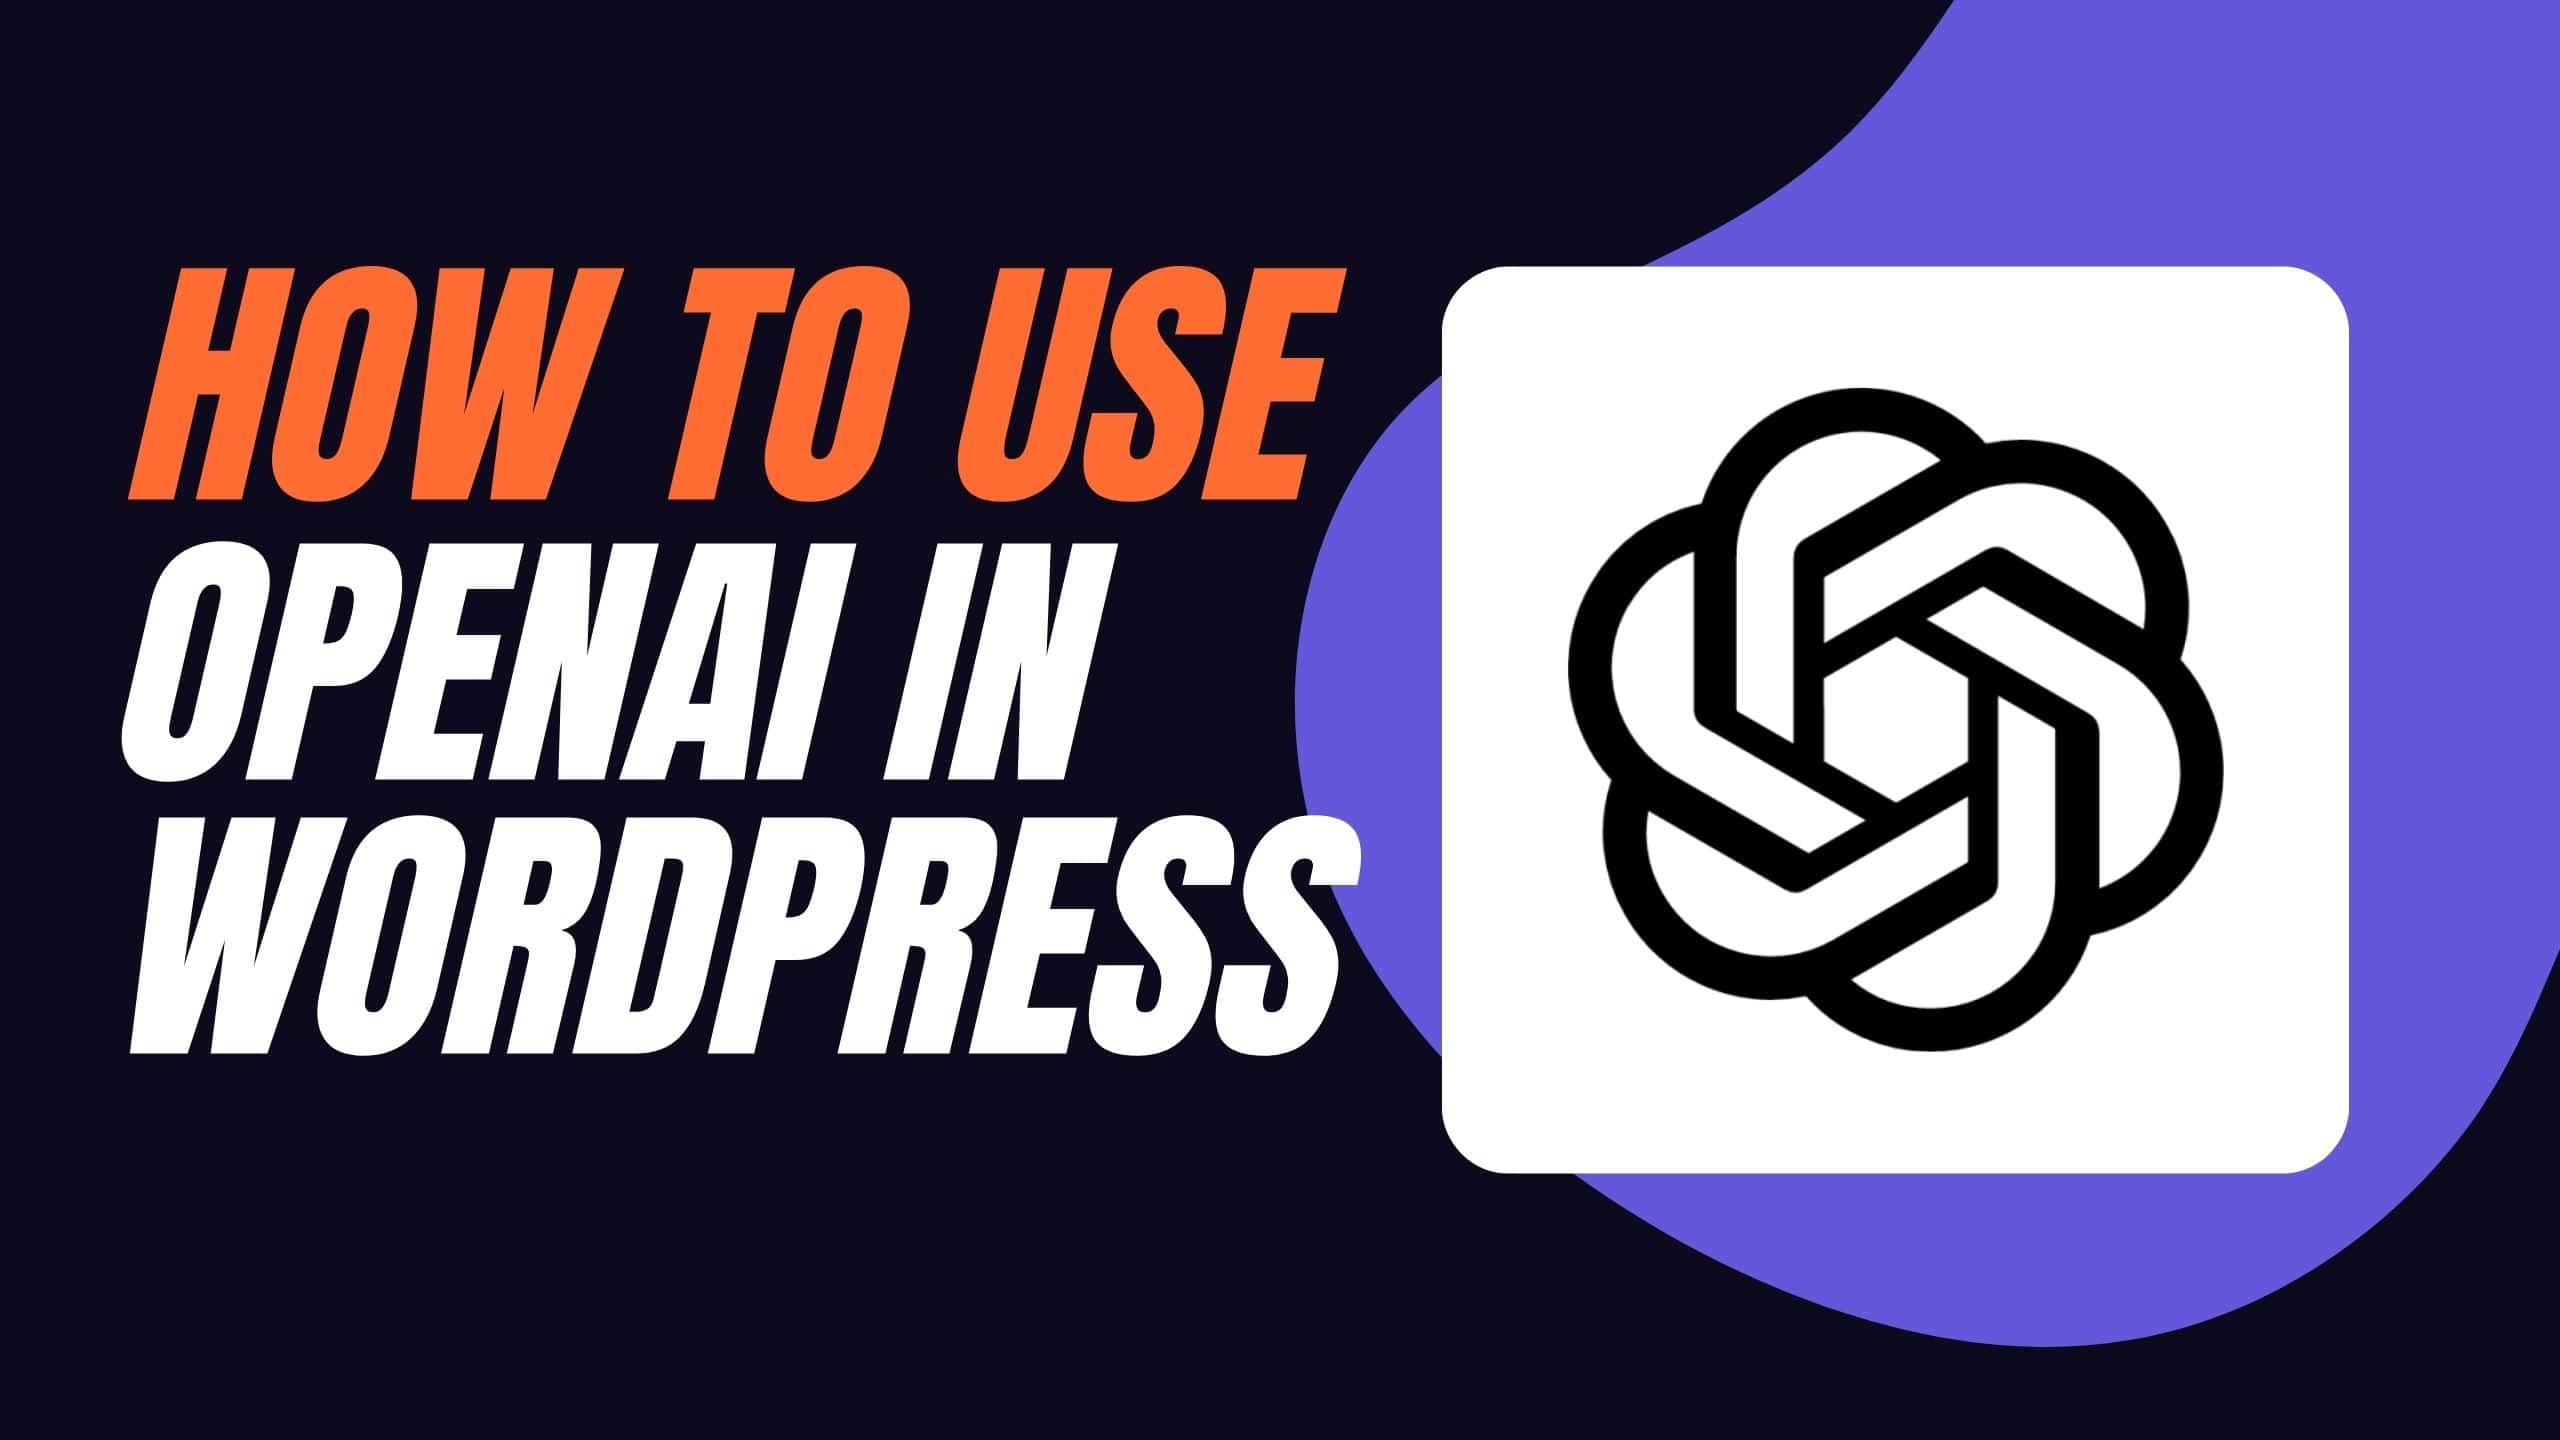 Featured image for “How to use OpenAI within WordPress (Yoast SEO example)”